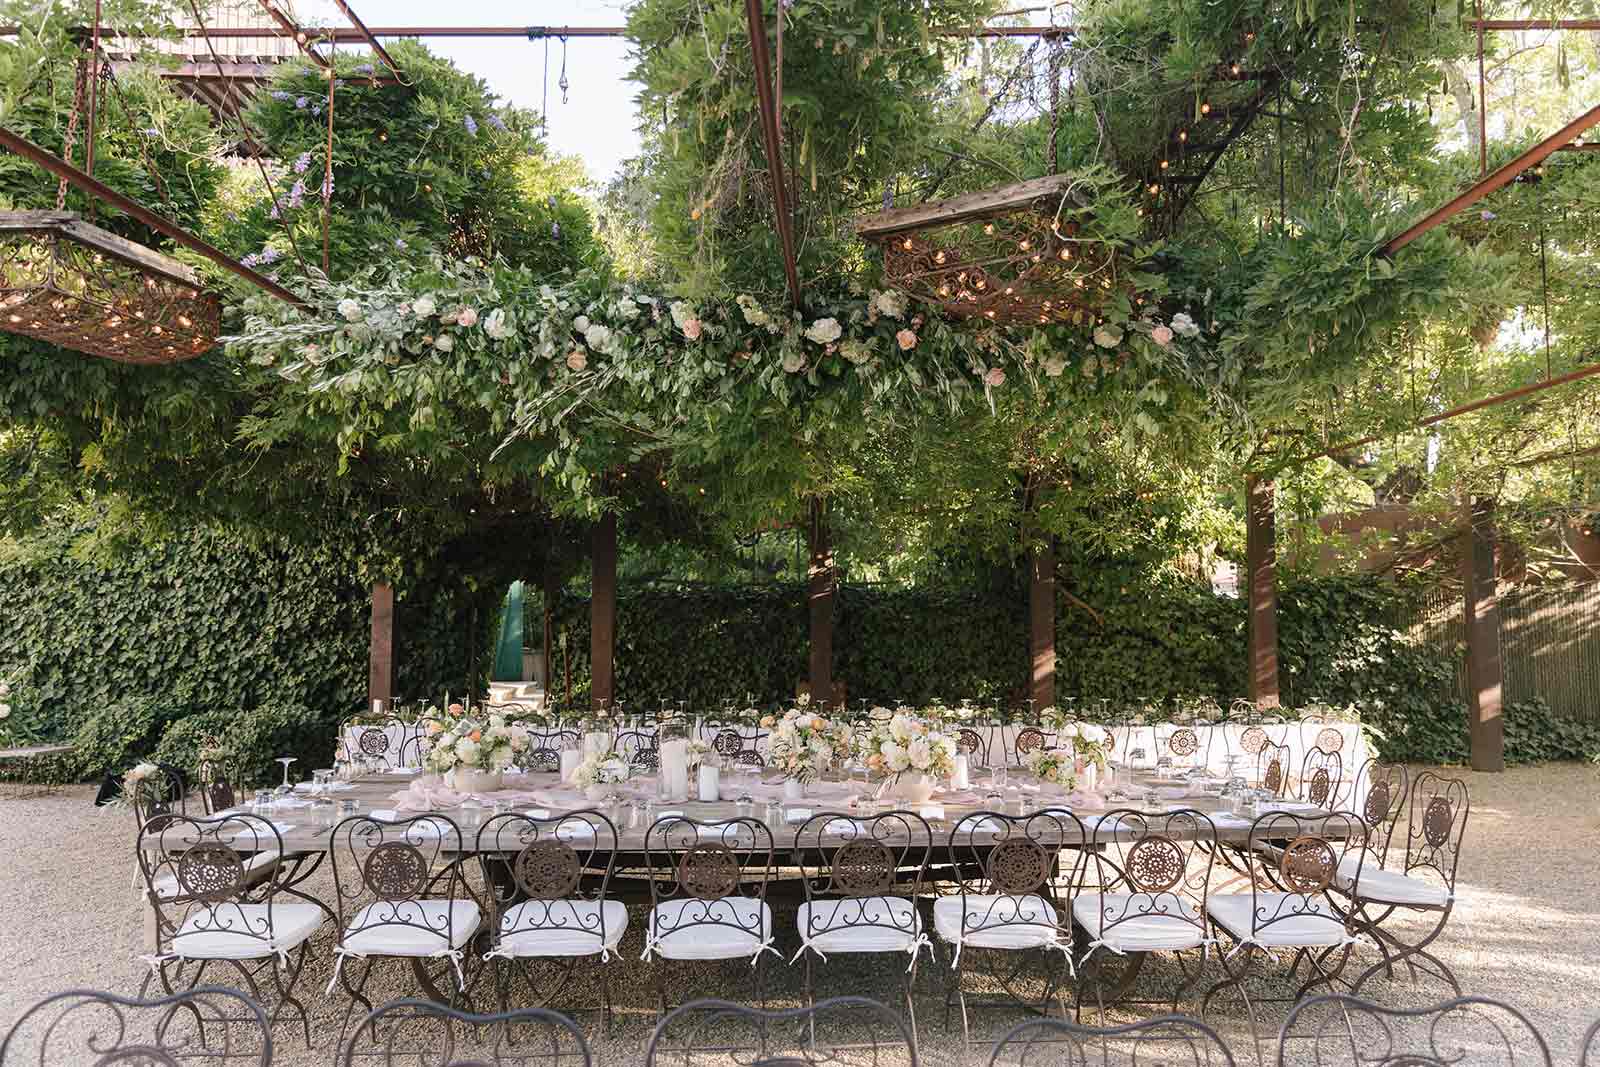 tables set up for the wedding dinner under a canopy with flowers overhead and in vases on the table